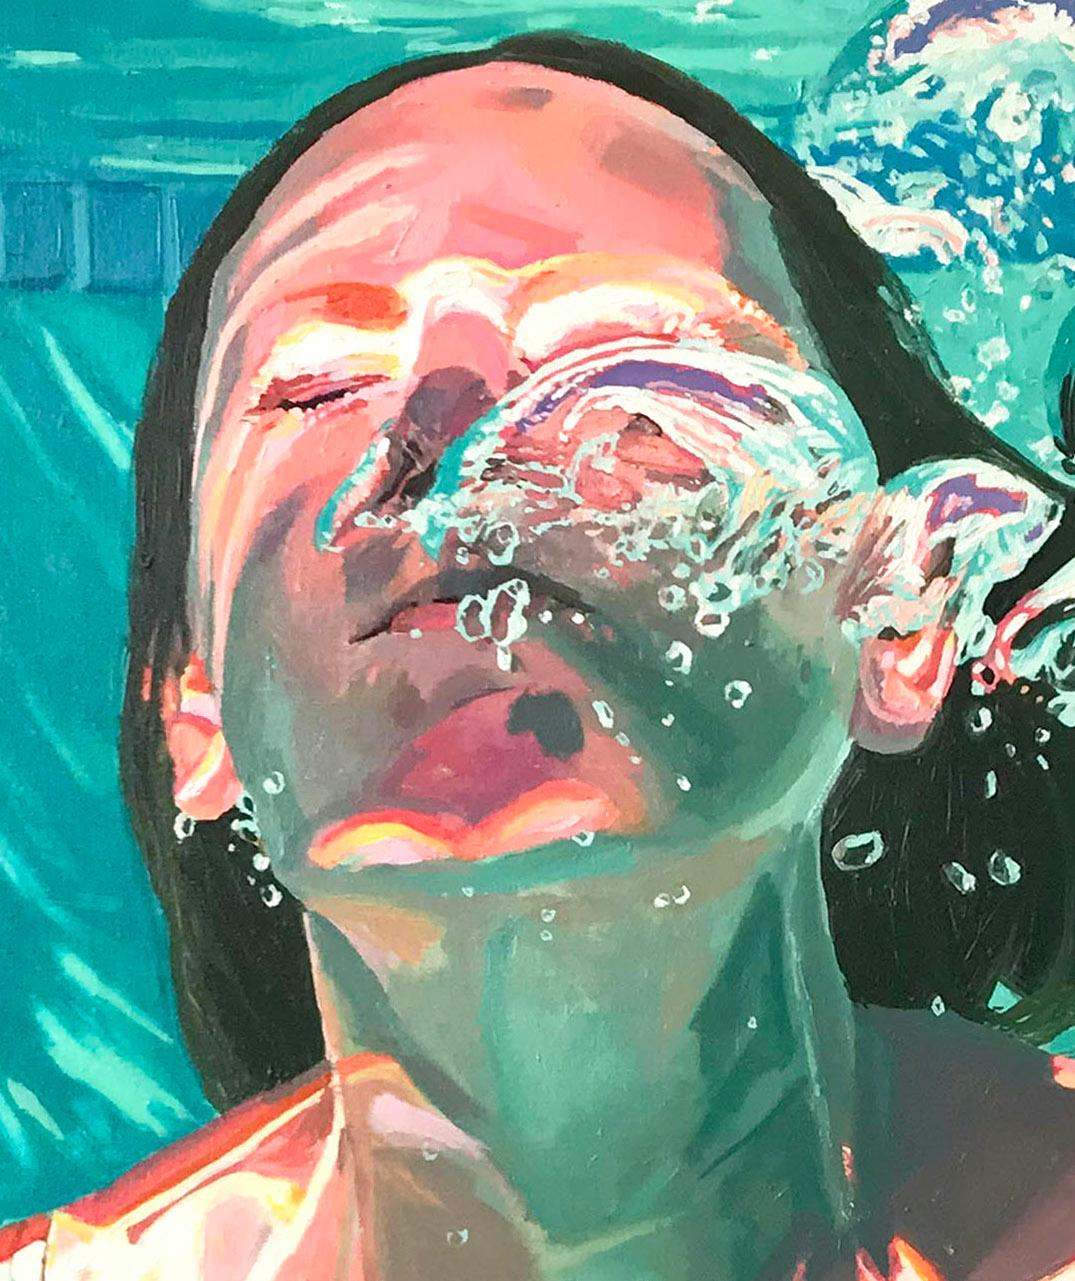 From The Sun, Samantha French Oil on Canvas Swimming Pool Swimmer Water Female

Samantha French's work is highly regarded and sought after for line it skirts between abstract and realism.  A well-known NY based artist, her popularity has soared